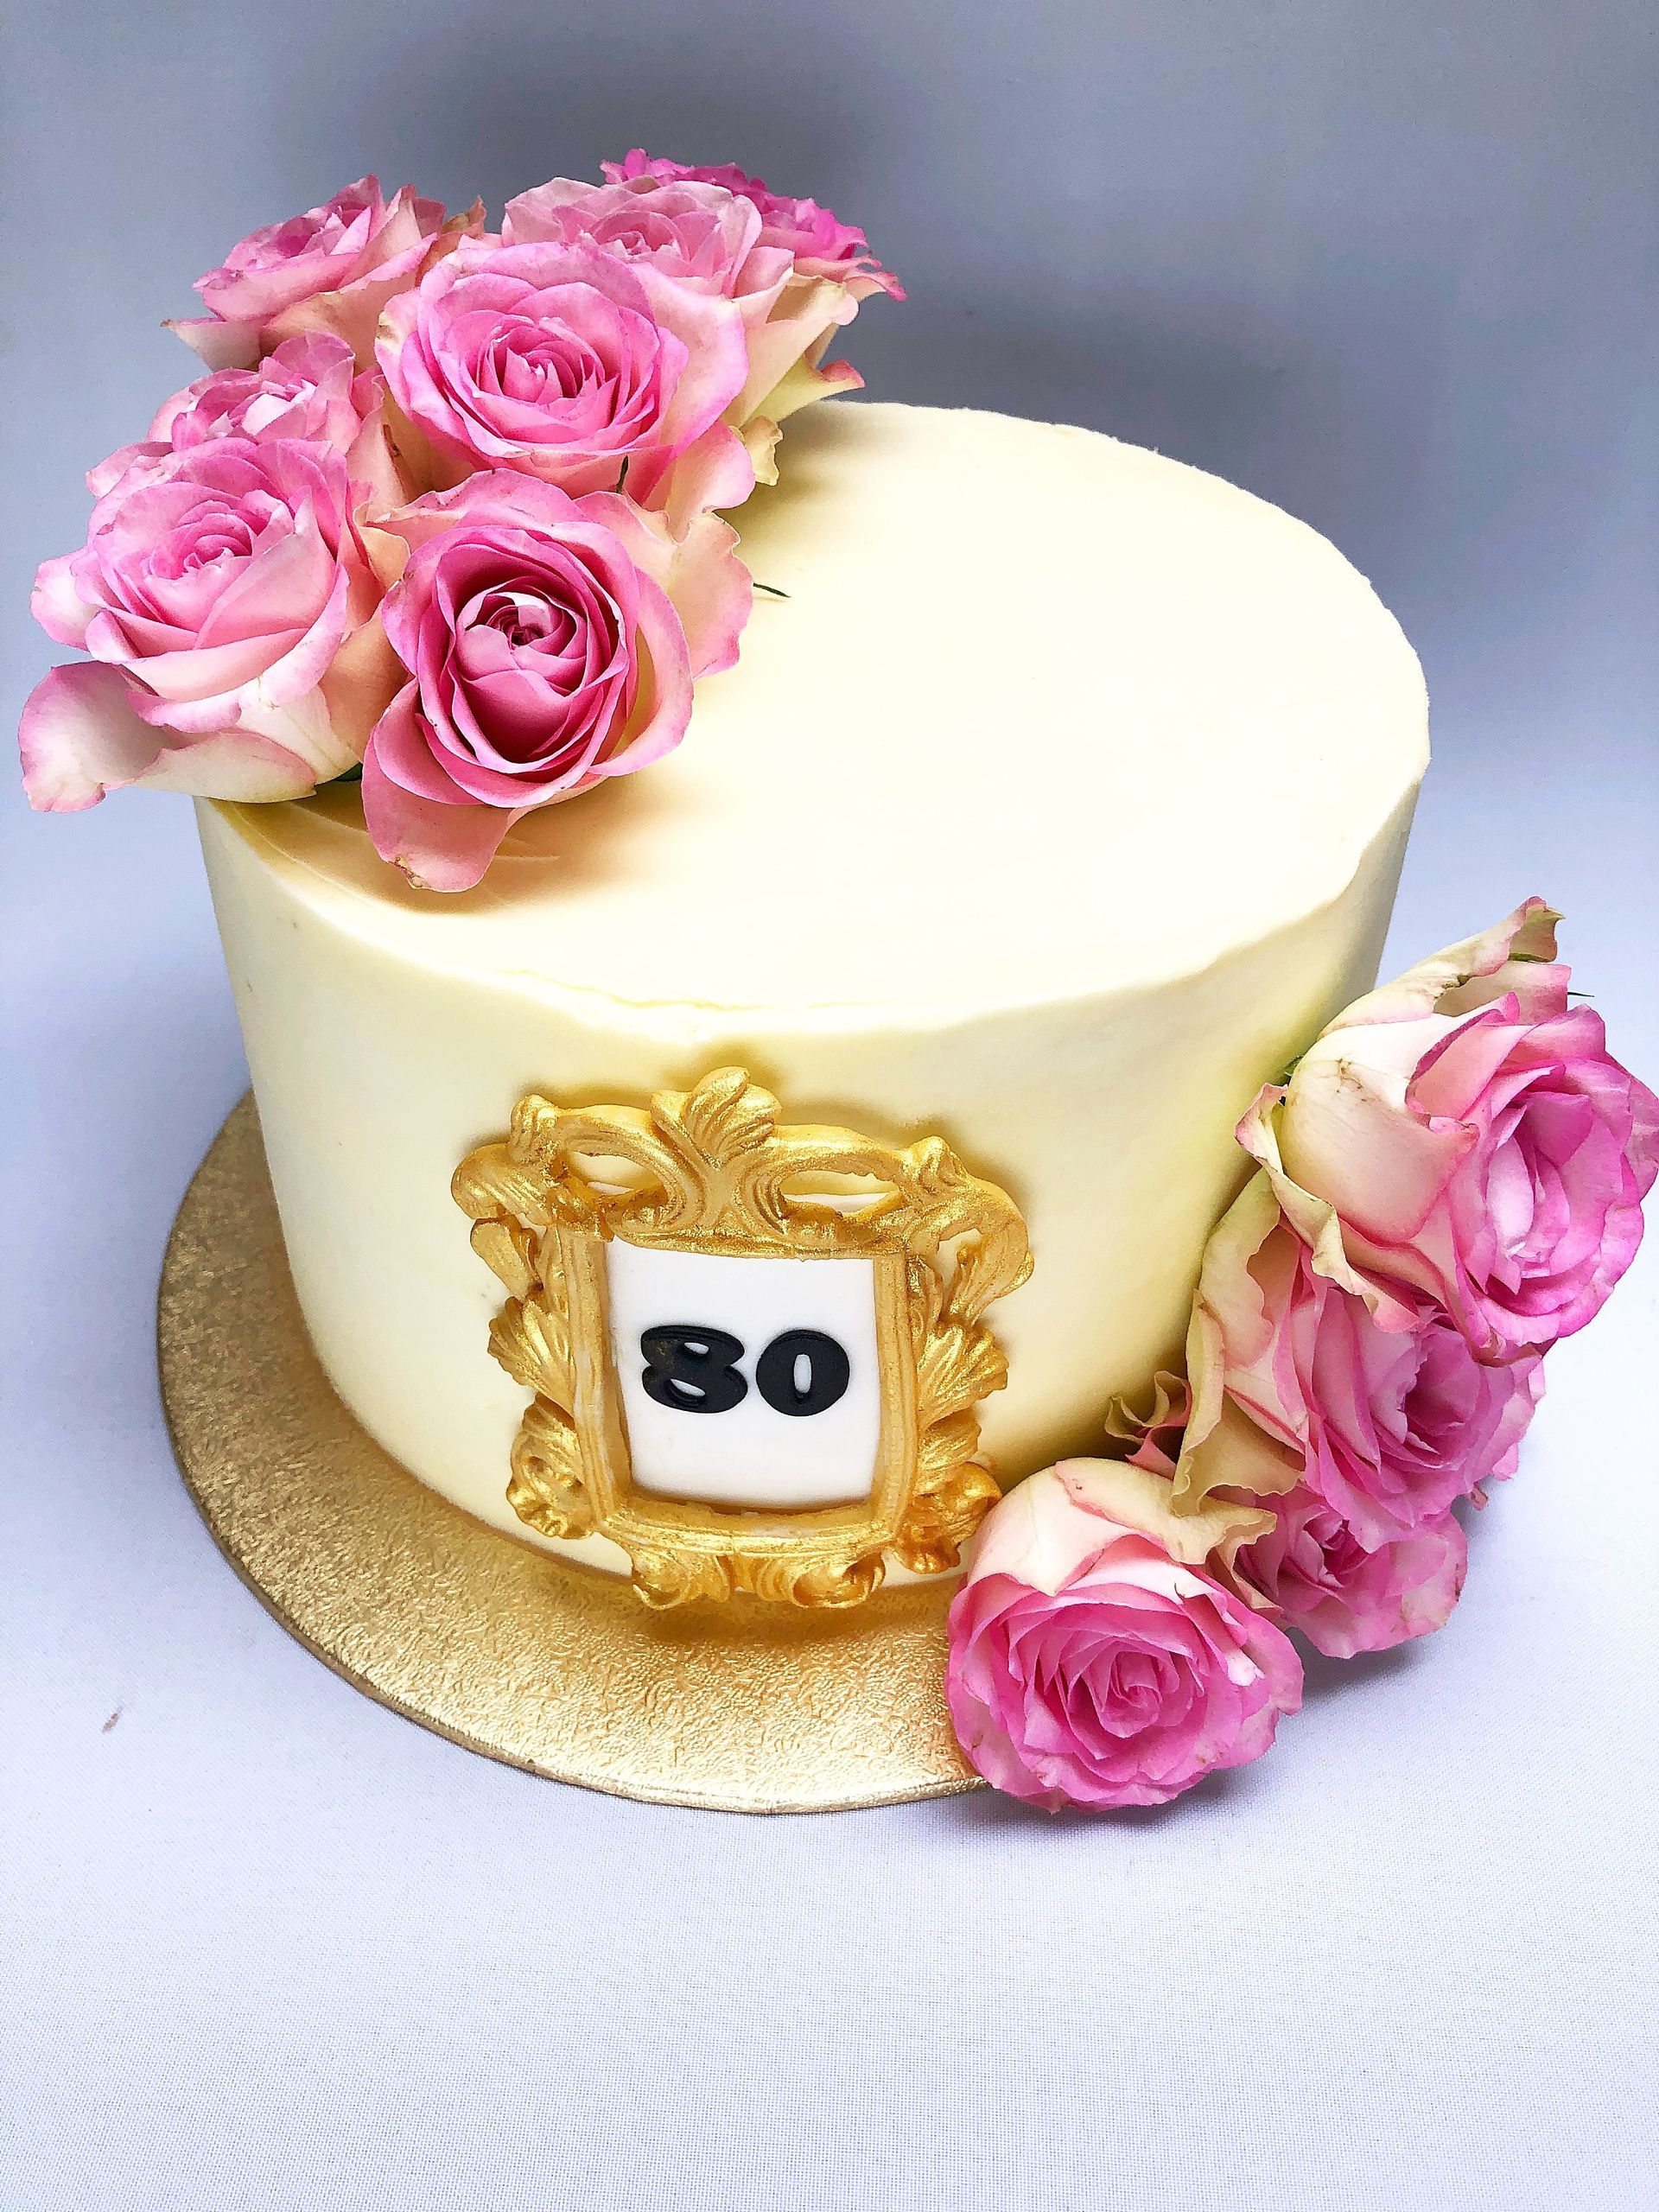 Ivory buttercream covered cake with gold fondant frame with the number 80 in the frame, and pink roses adorning the cake.